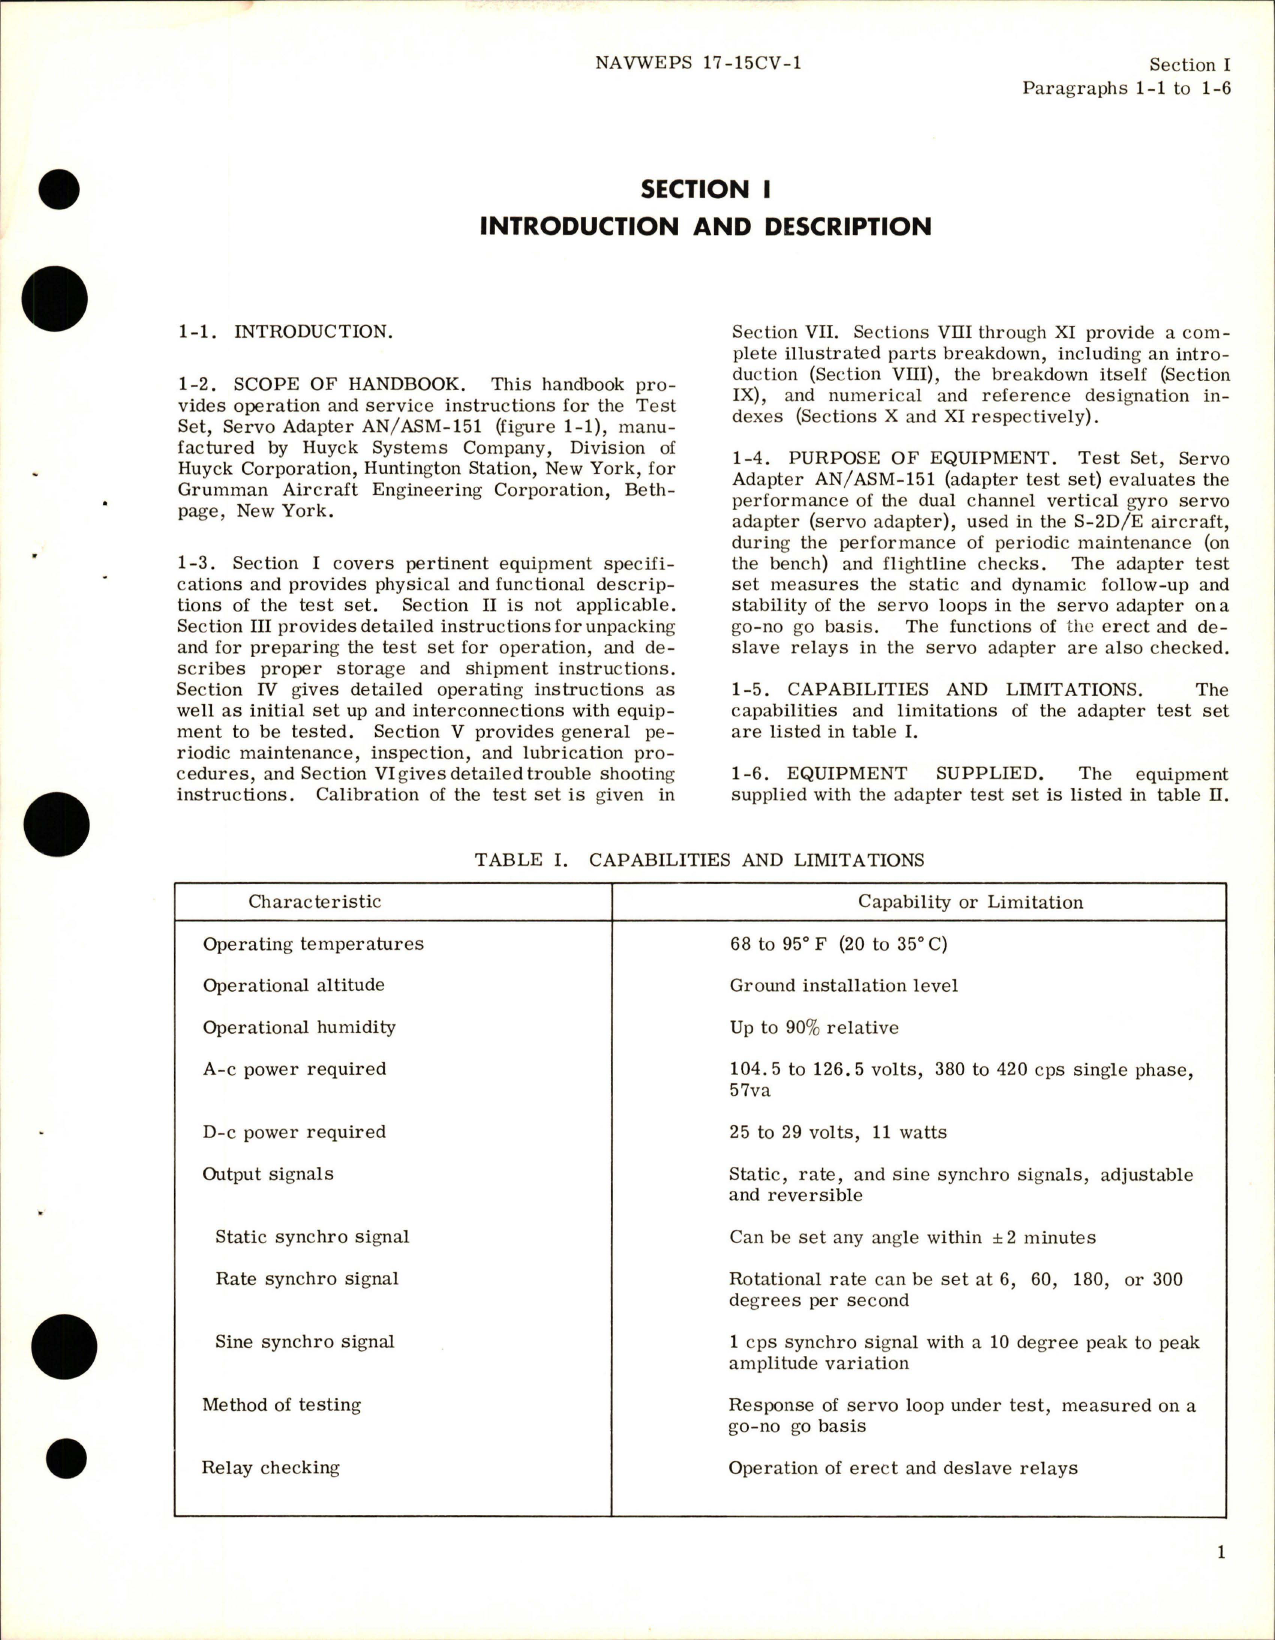 Sample page 7 from AirCorps Library document: Operation and Service Instructions with Illustrated Parts for Servo Adapter Test Set - ASM-151 - Part GAEC 121SEAV114